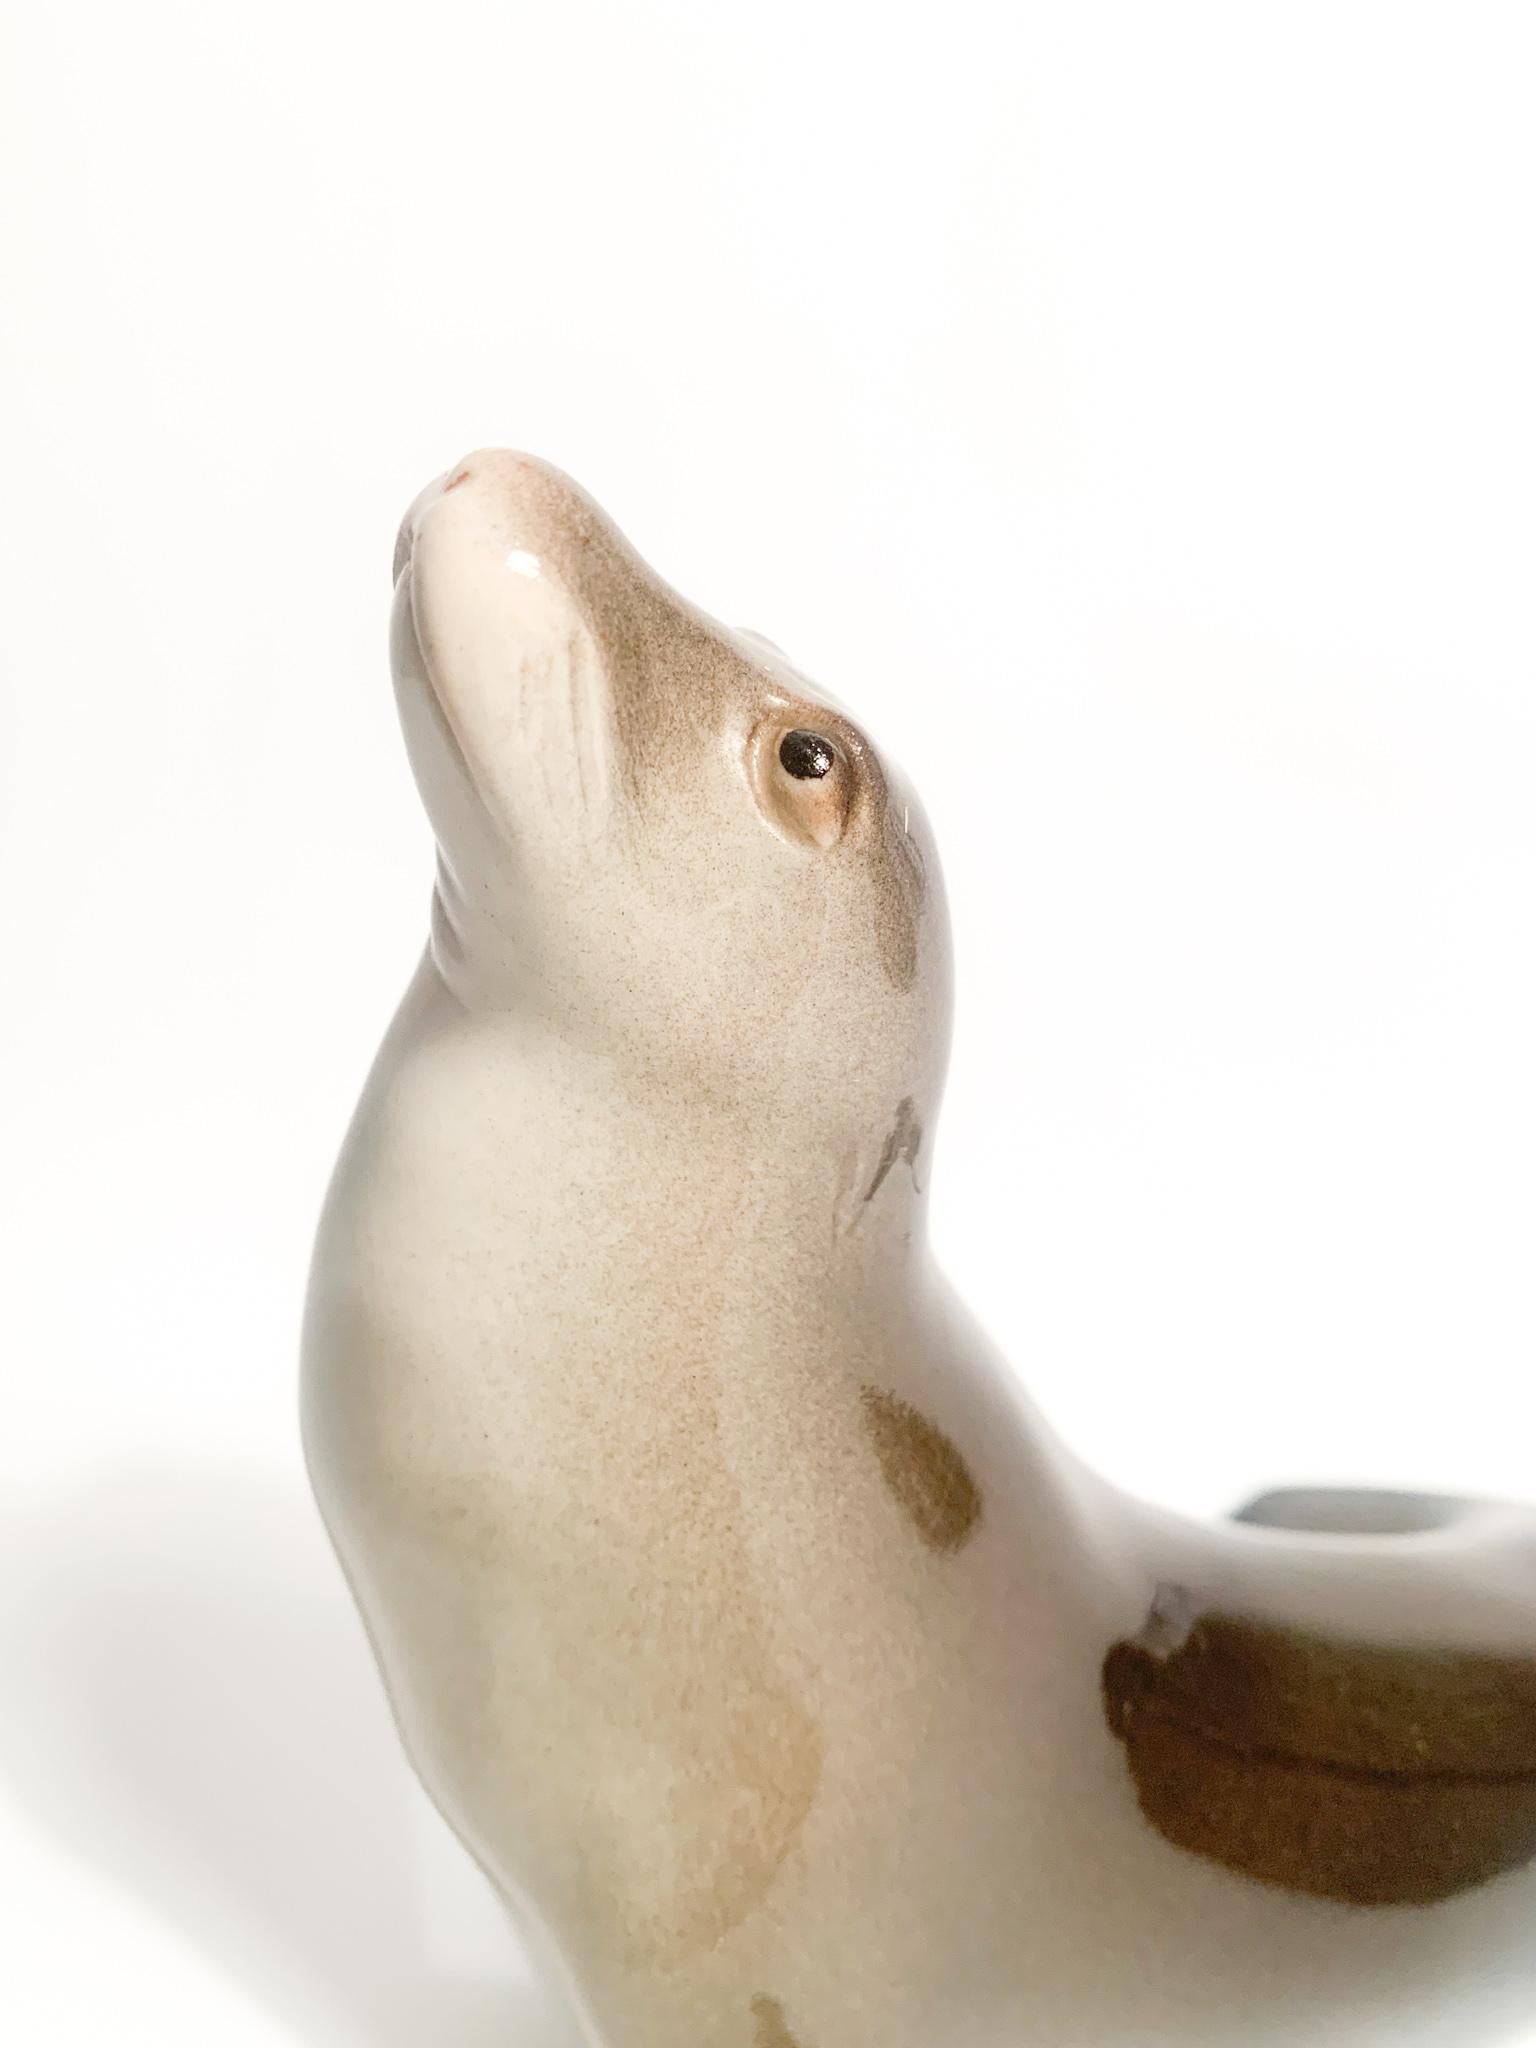 Porcelain URSS Ceramic Sculpture of a Seal from the 1940s For Sale